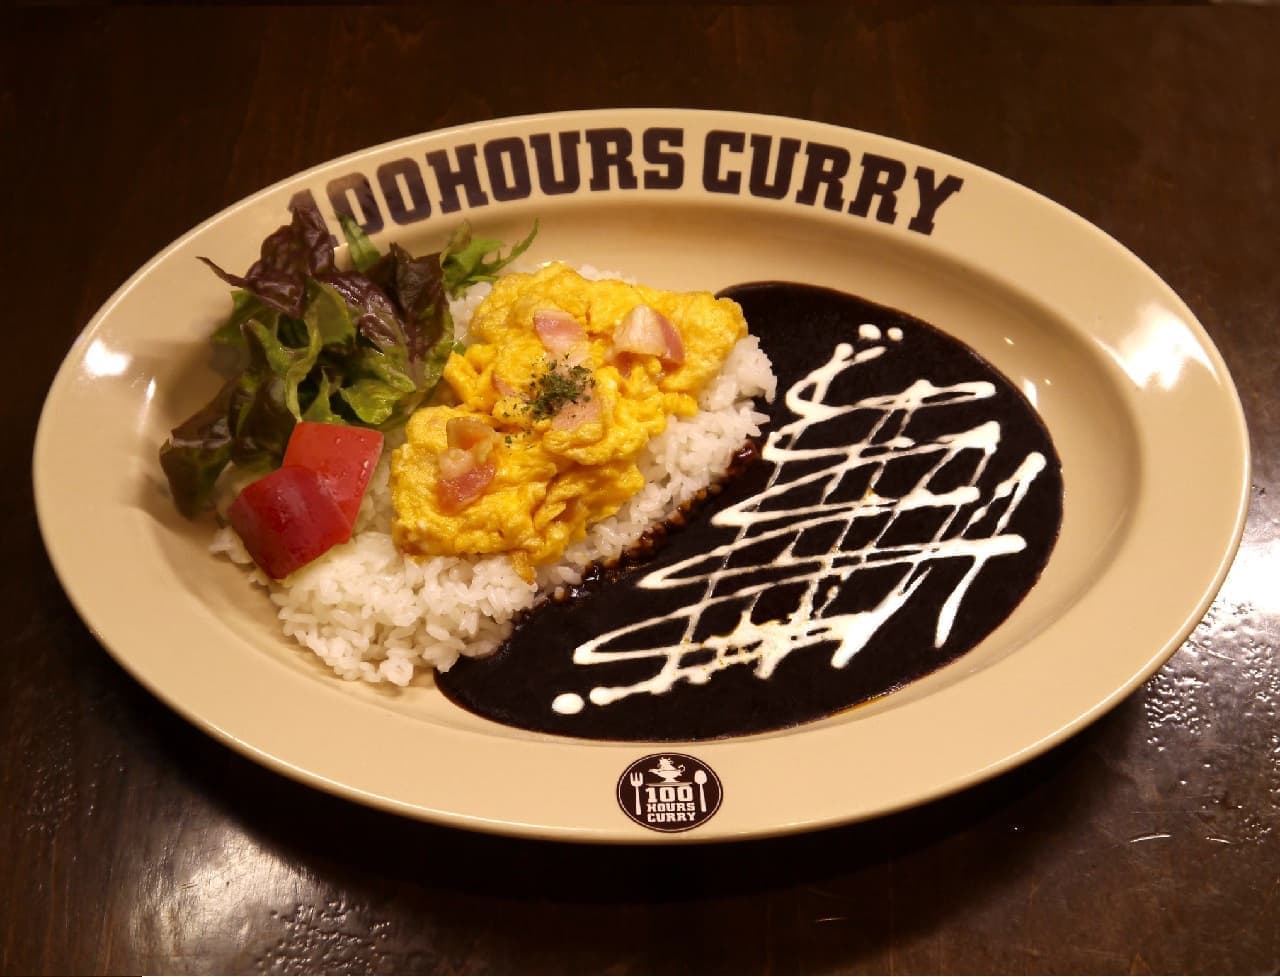 100-hour curry "Morning curry 500 yen"